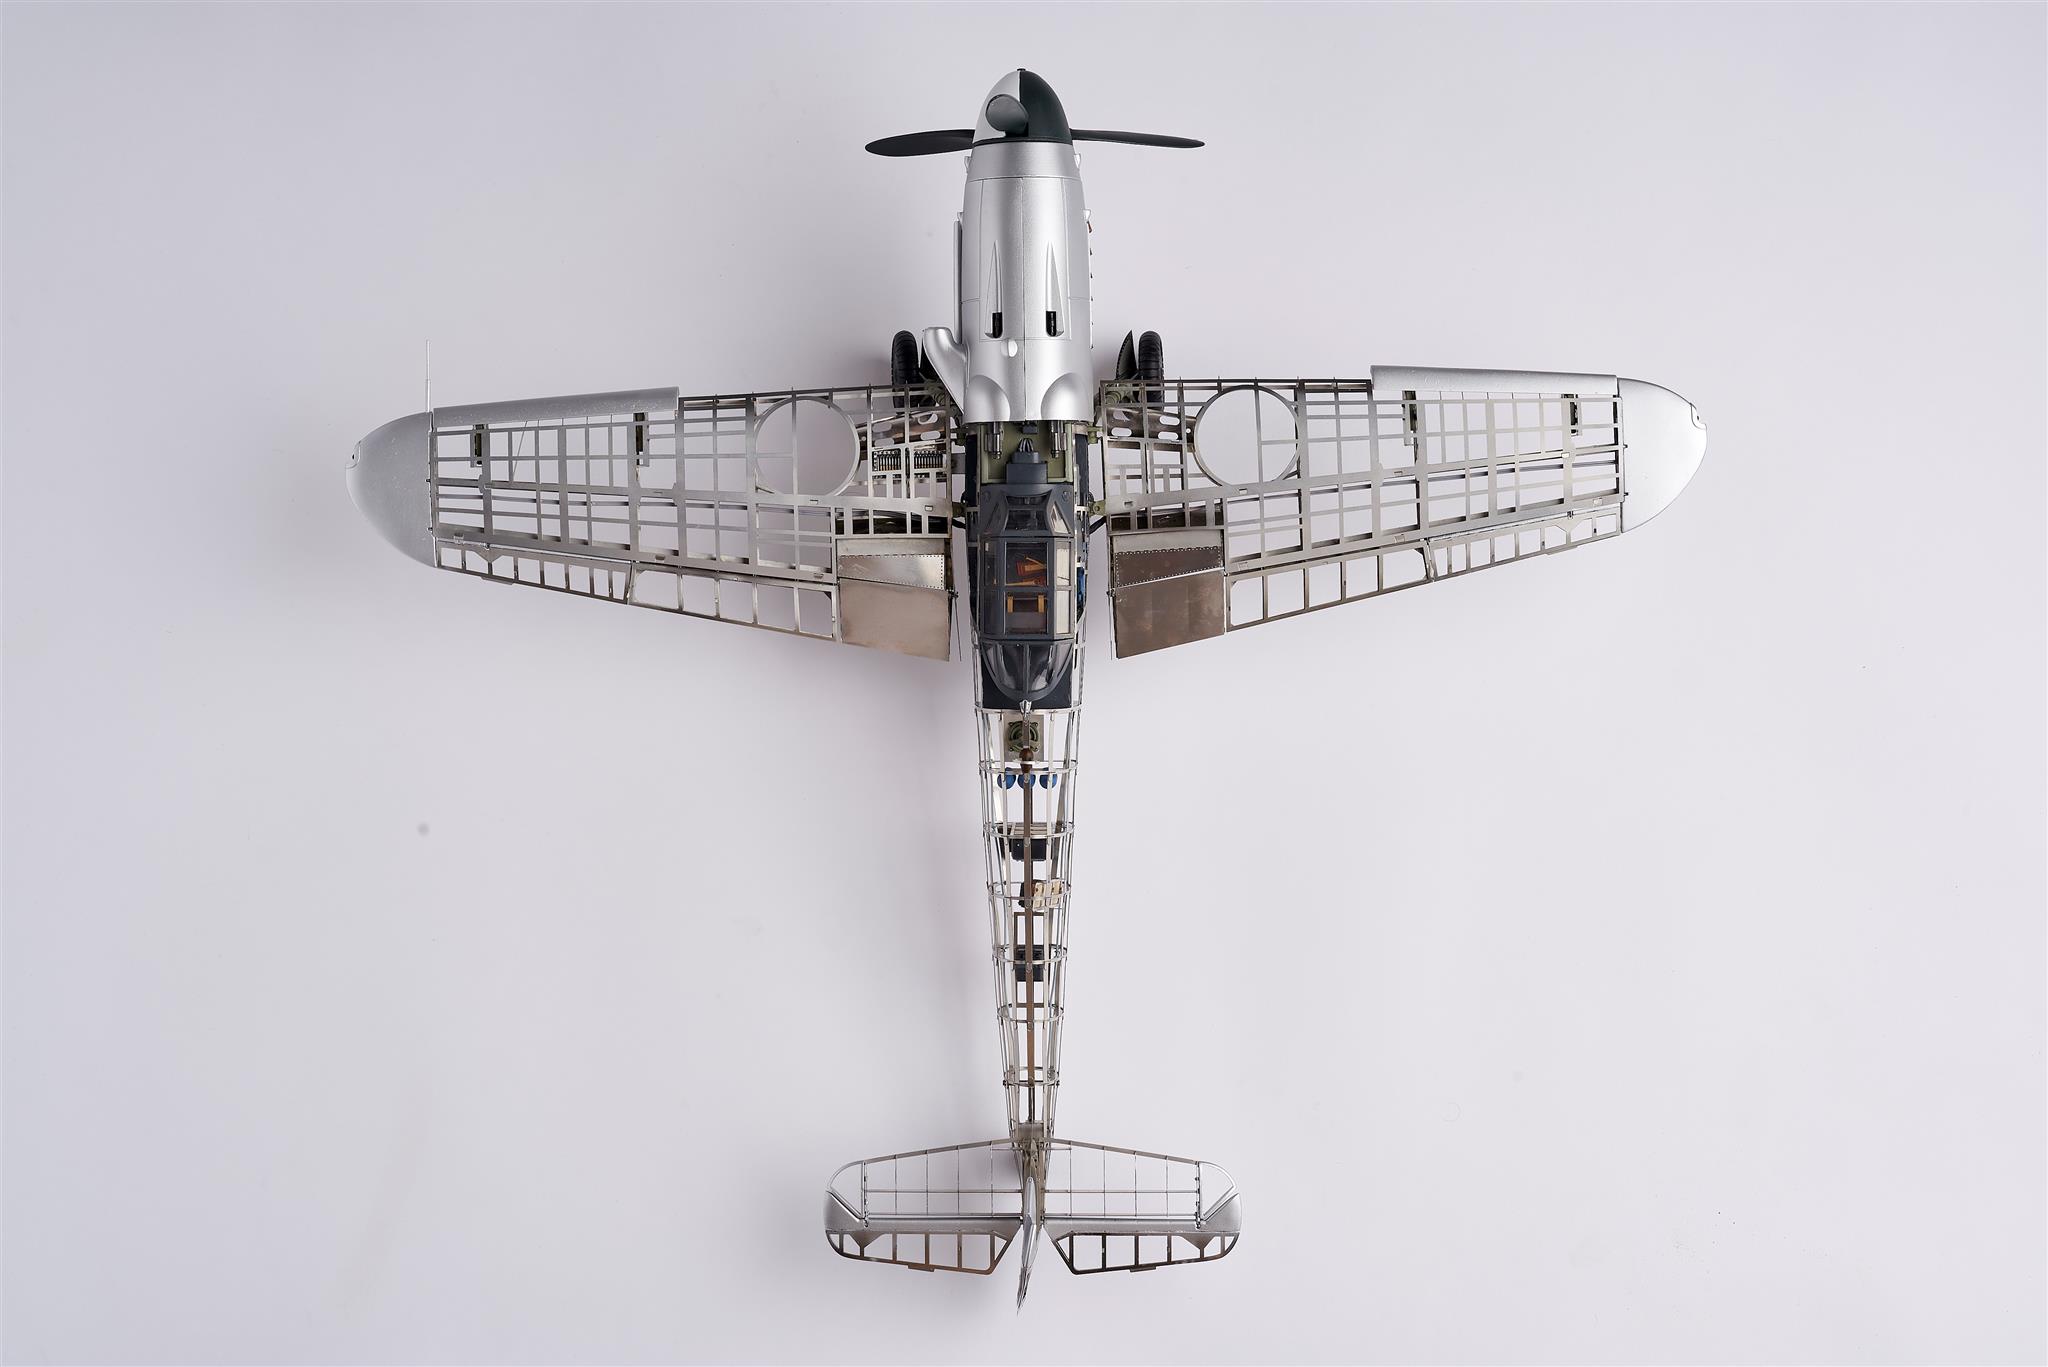 A beauty on aircraft modeling: build the BF 109G